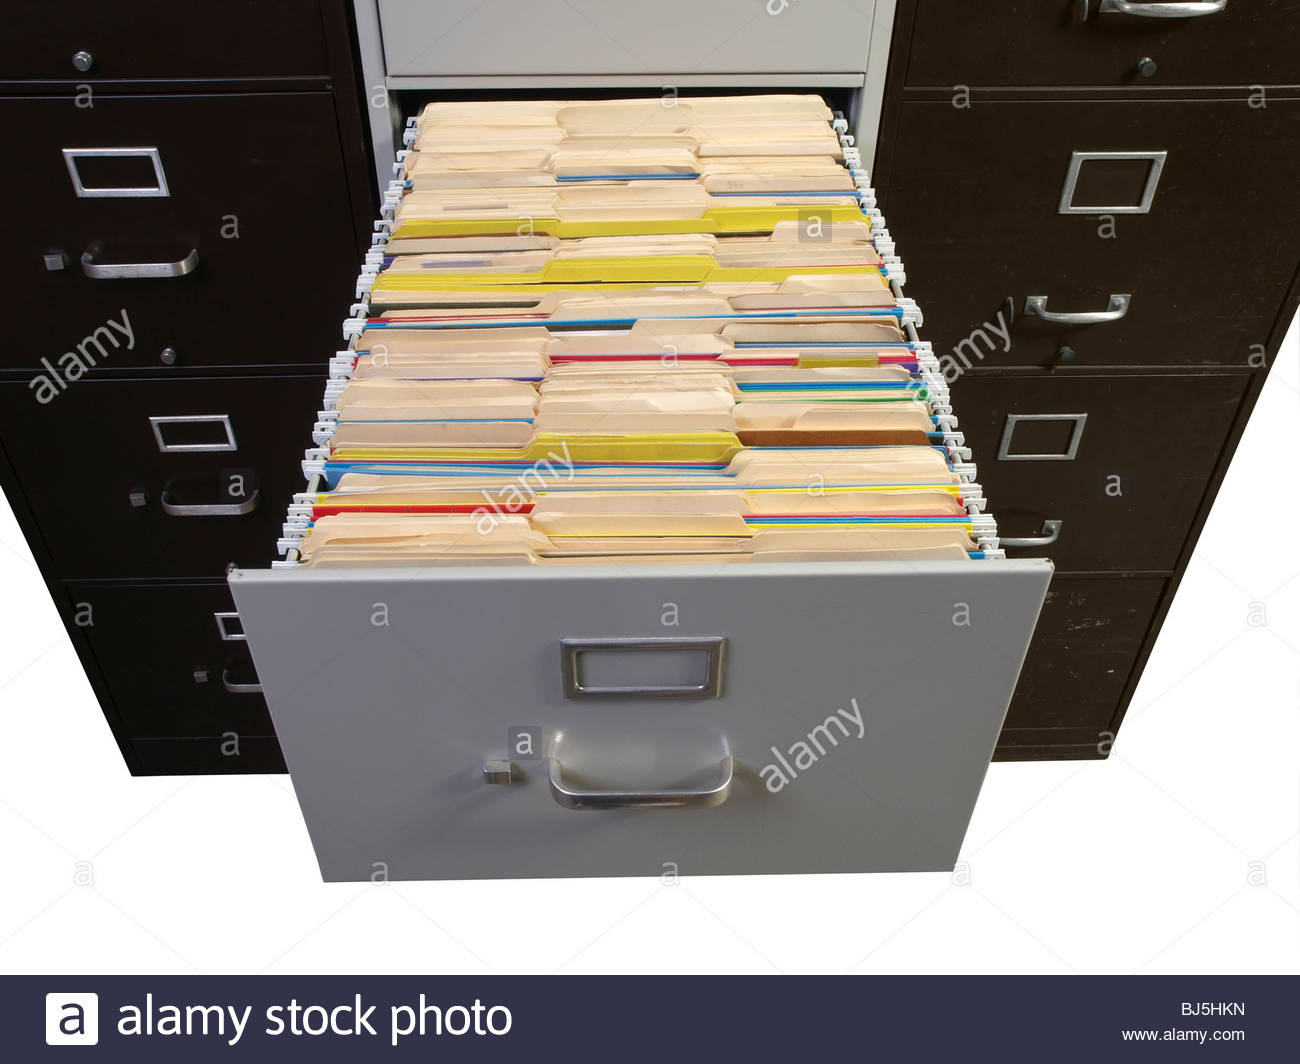 Funky Collection Of Vintage Metal File Cabinets Stock Photo regarding size 1300 X 1064